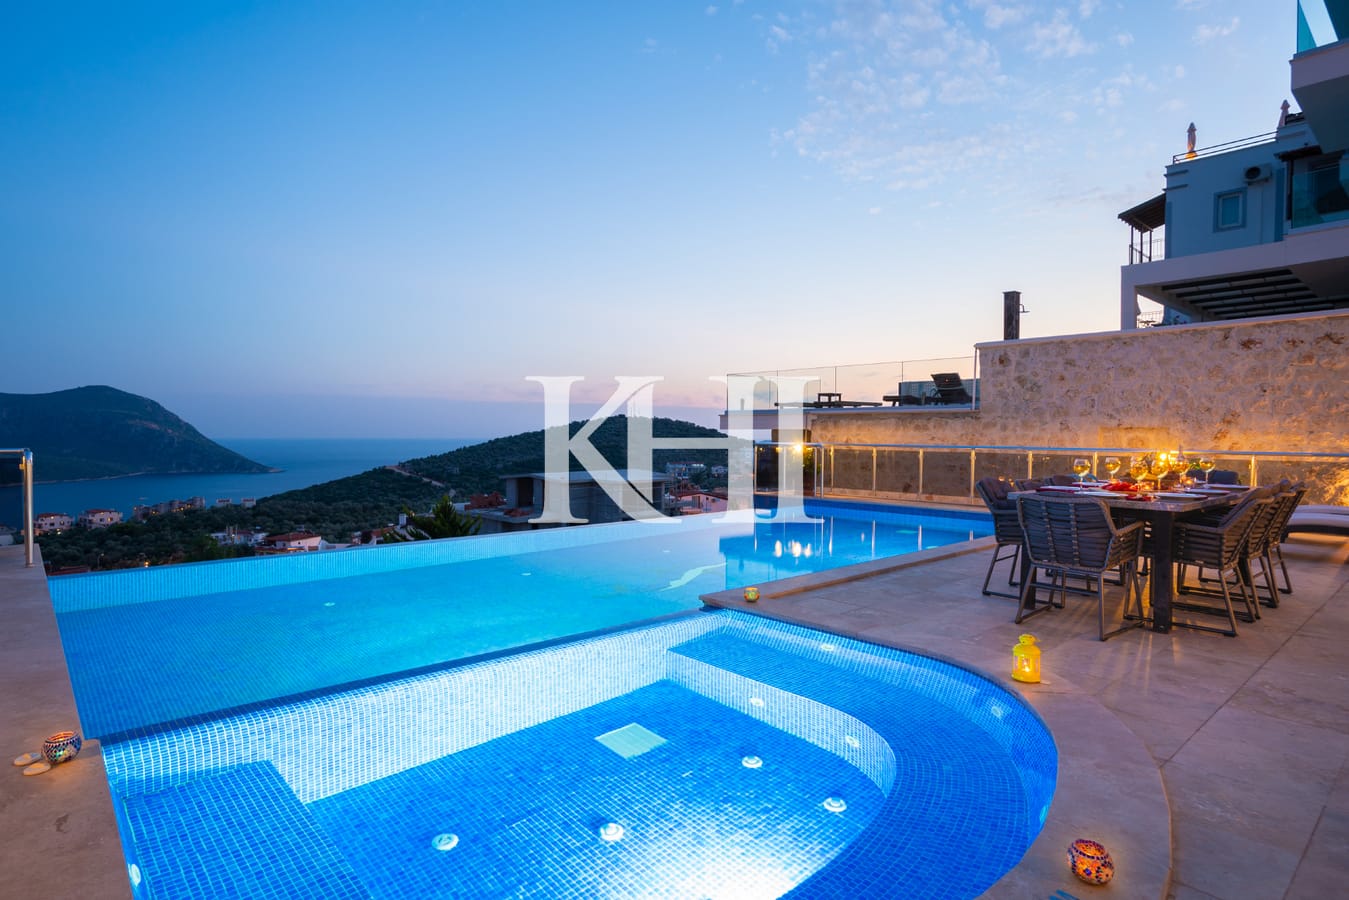 Detached Villa For Sale With Panoramic Kalkan View Slide Image 14